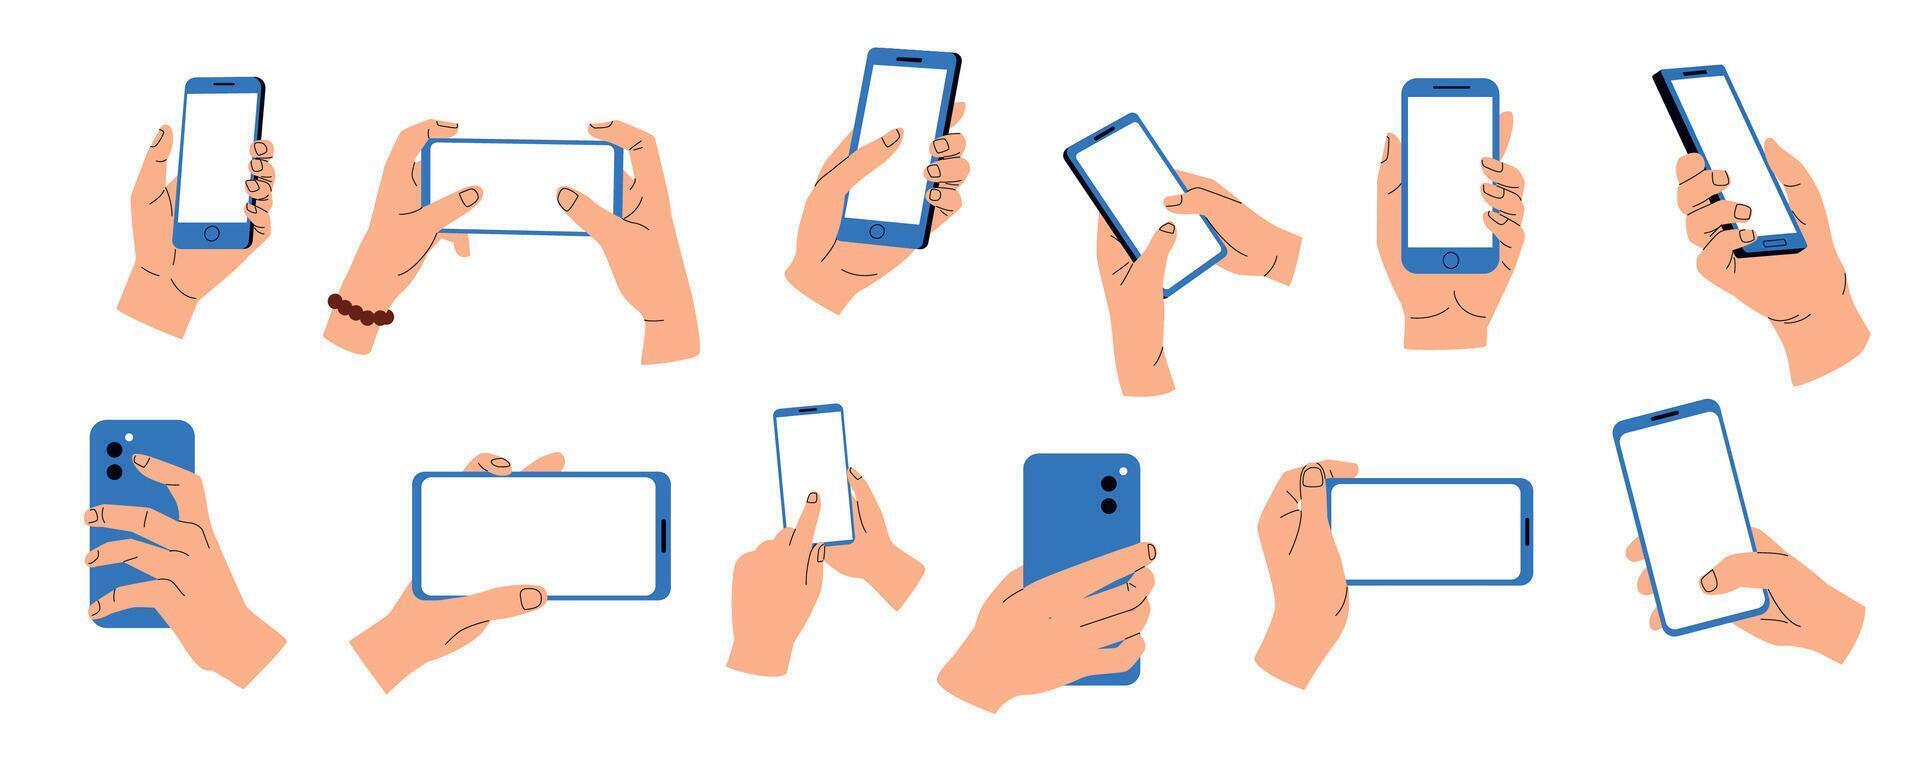 Hands holding phones. Smartphone mobile devices with touchscreen, cartoon palms with fingers using electronic gadgets with empty screens. Vector illustration